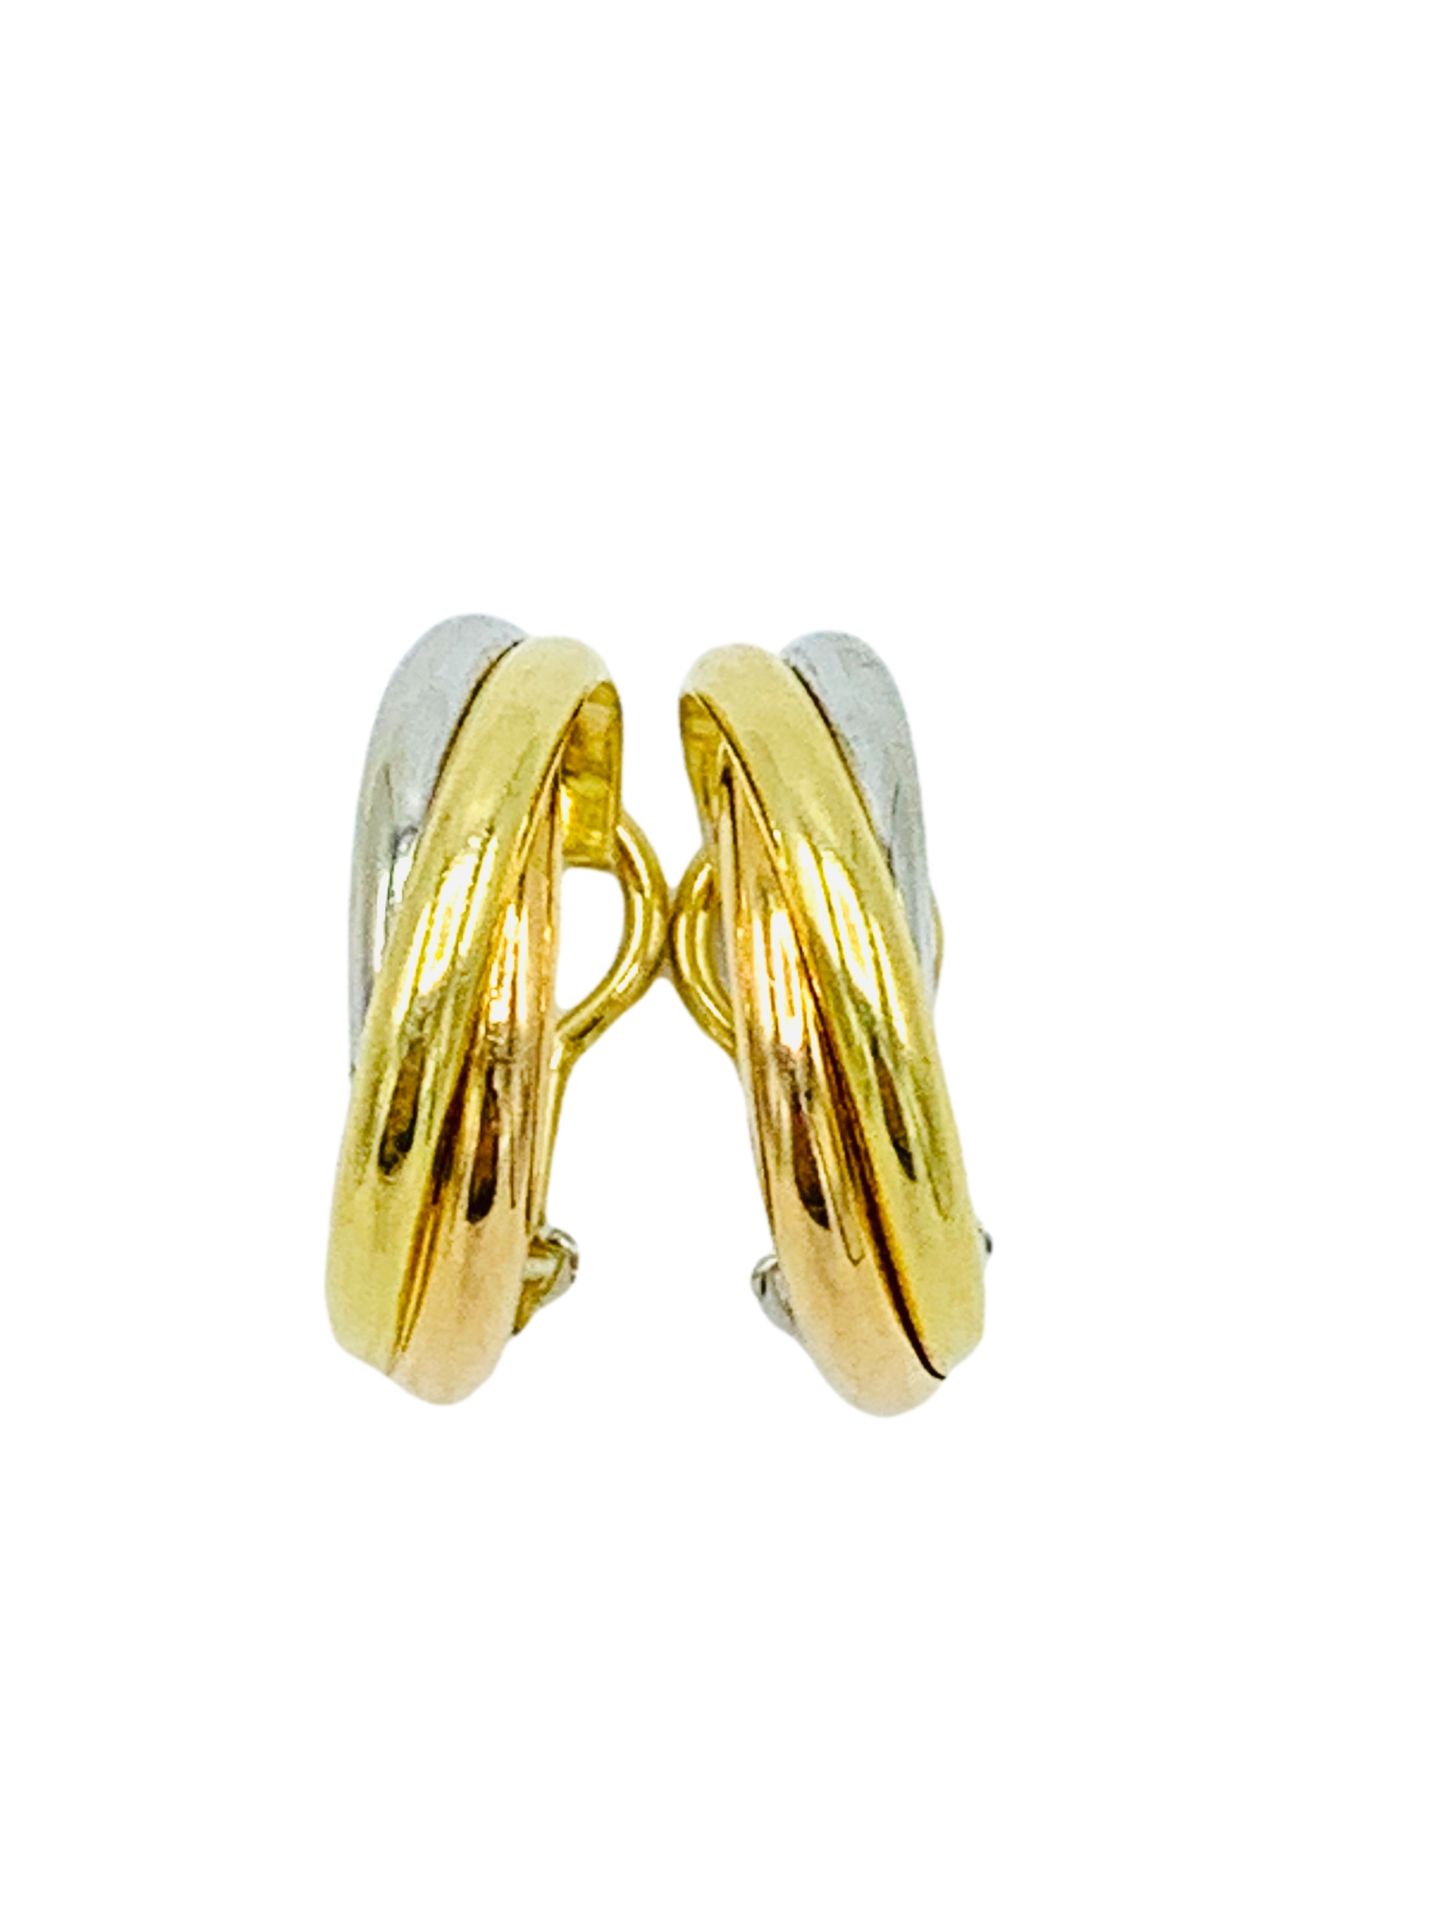 18ct gold Cartier three colour twist earrings. - Image 2 of 5